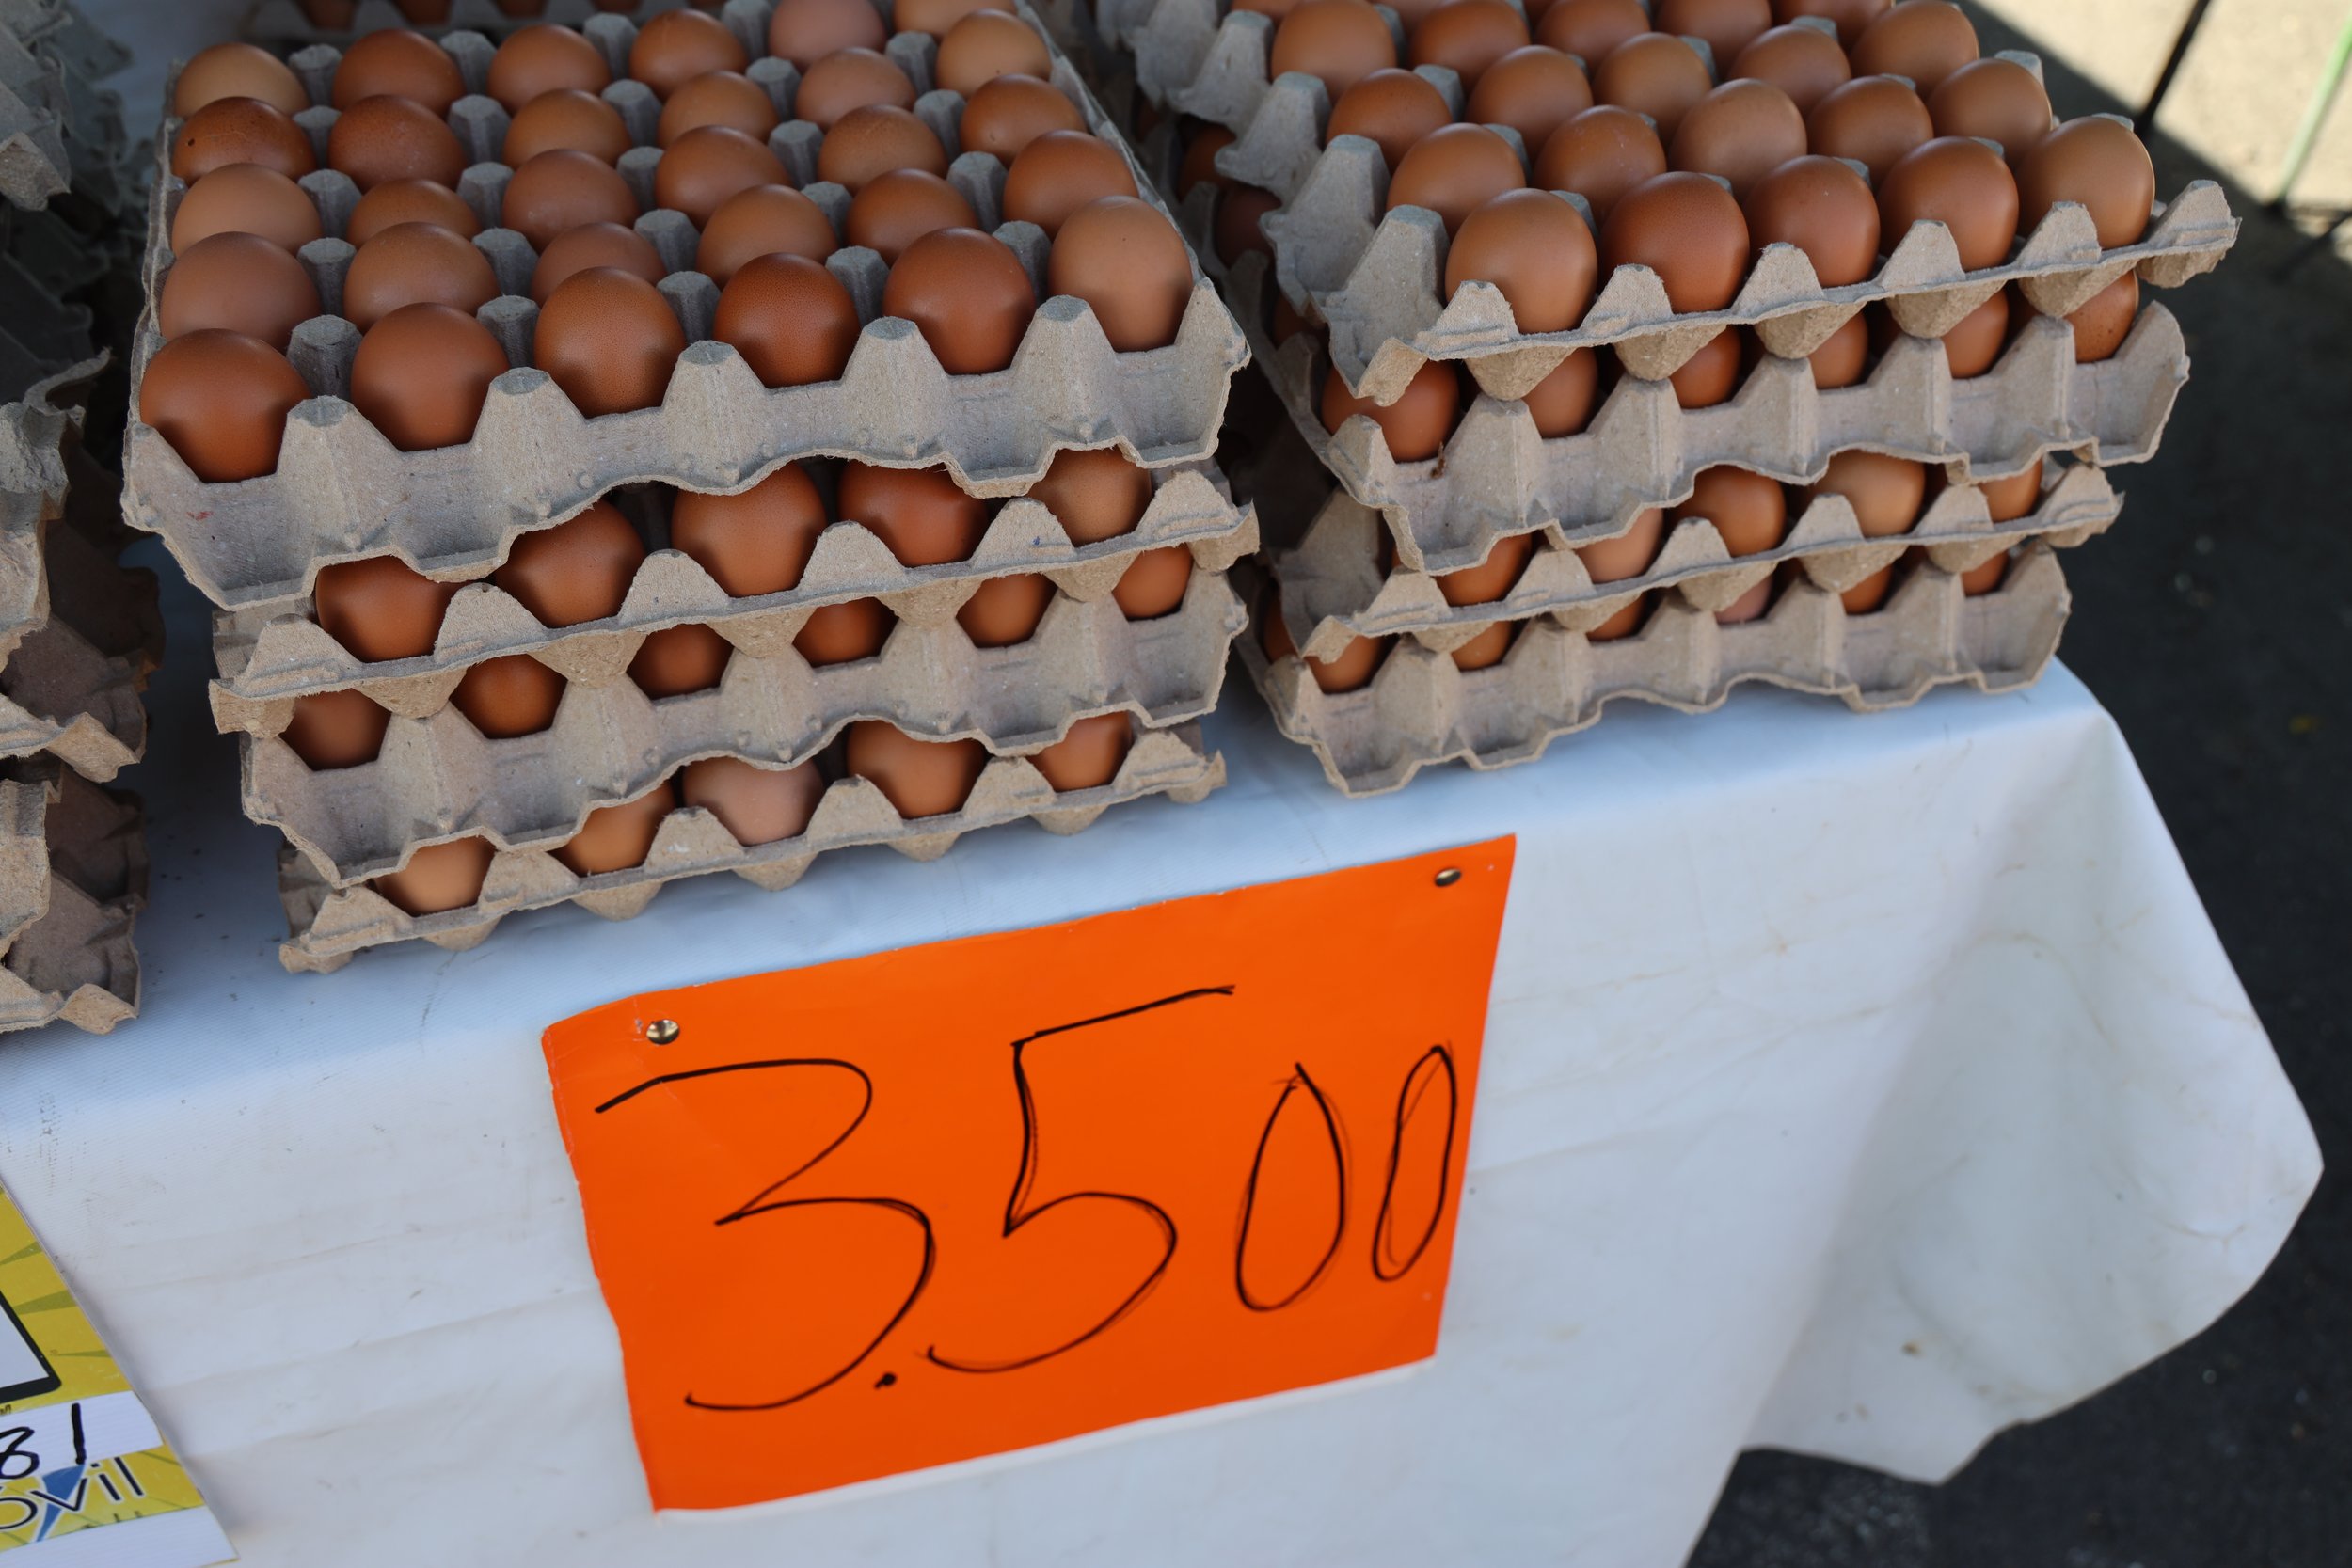  Egg prices in Costa Rica are comparable to those of the U.S., although a bit cheaper here.&nbsp; Each batch of 30 costs a little more than $8.&nbsp; 